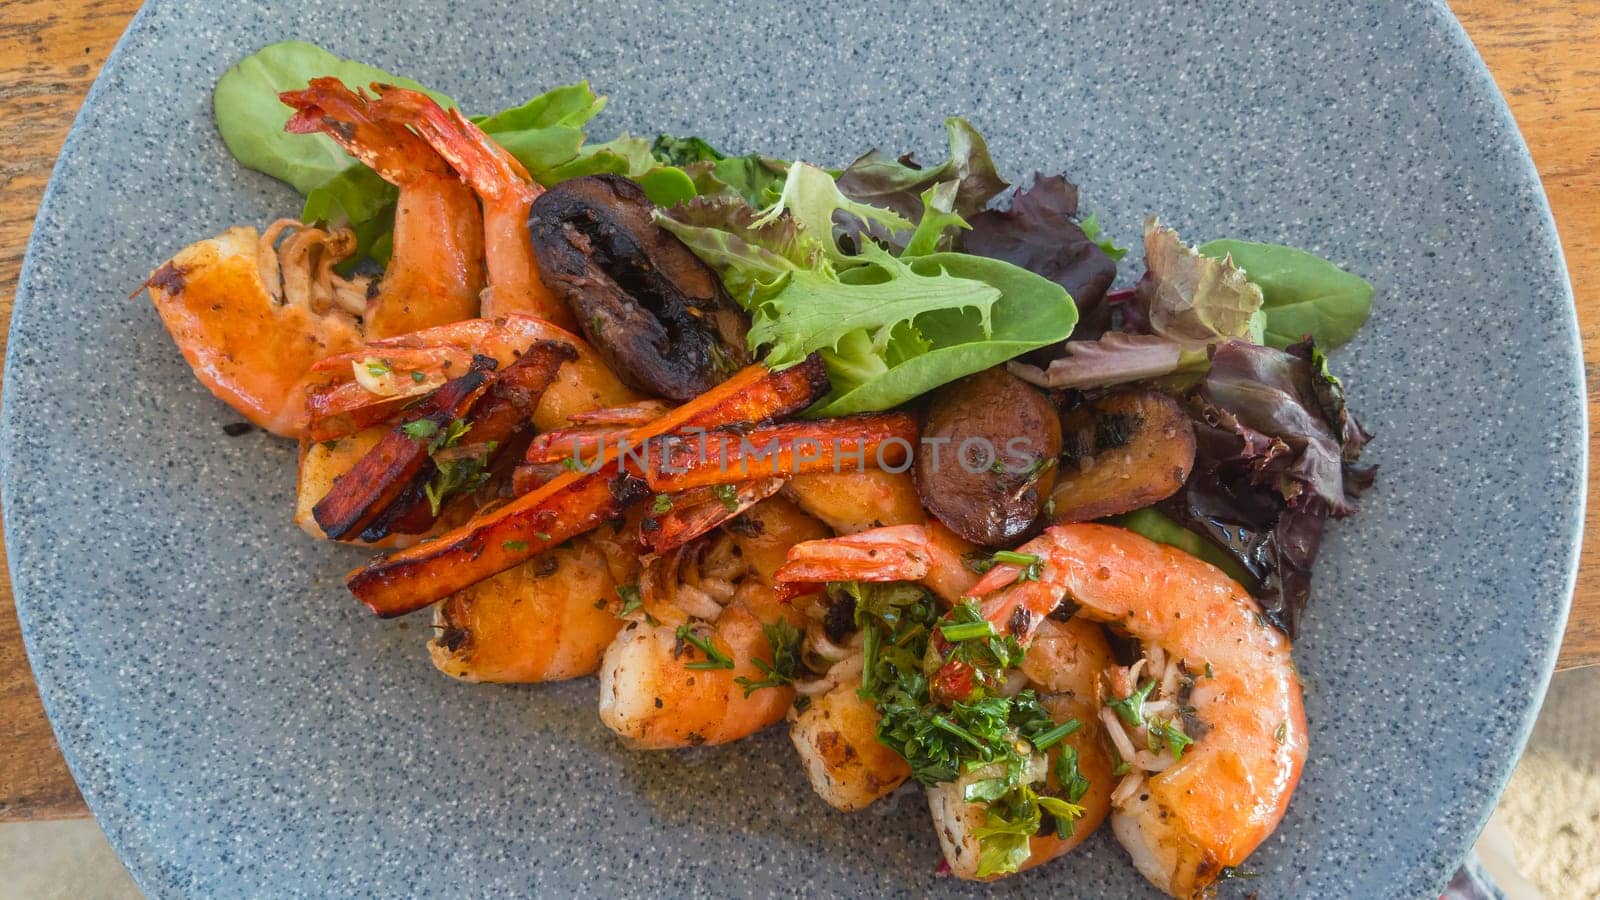 Shrimp with garlic butter and chimichurri sauce, camarones al ajo, delicious Mexican seafood dish with salad leaves on grey stone plate.